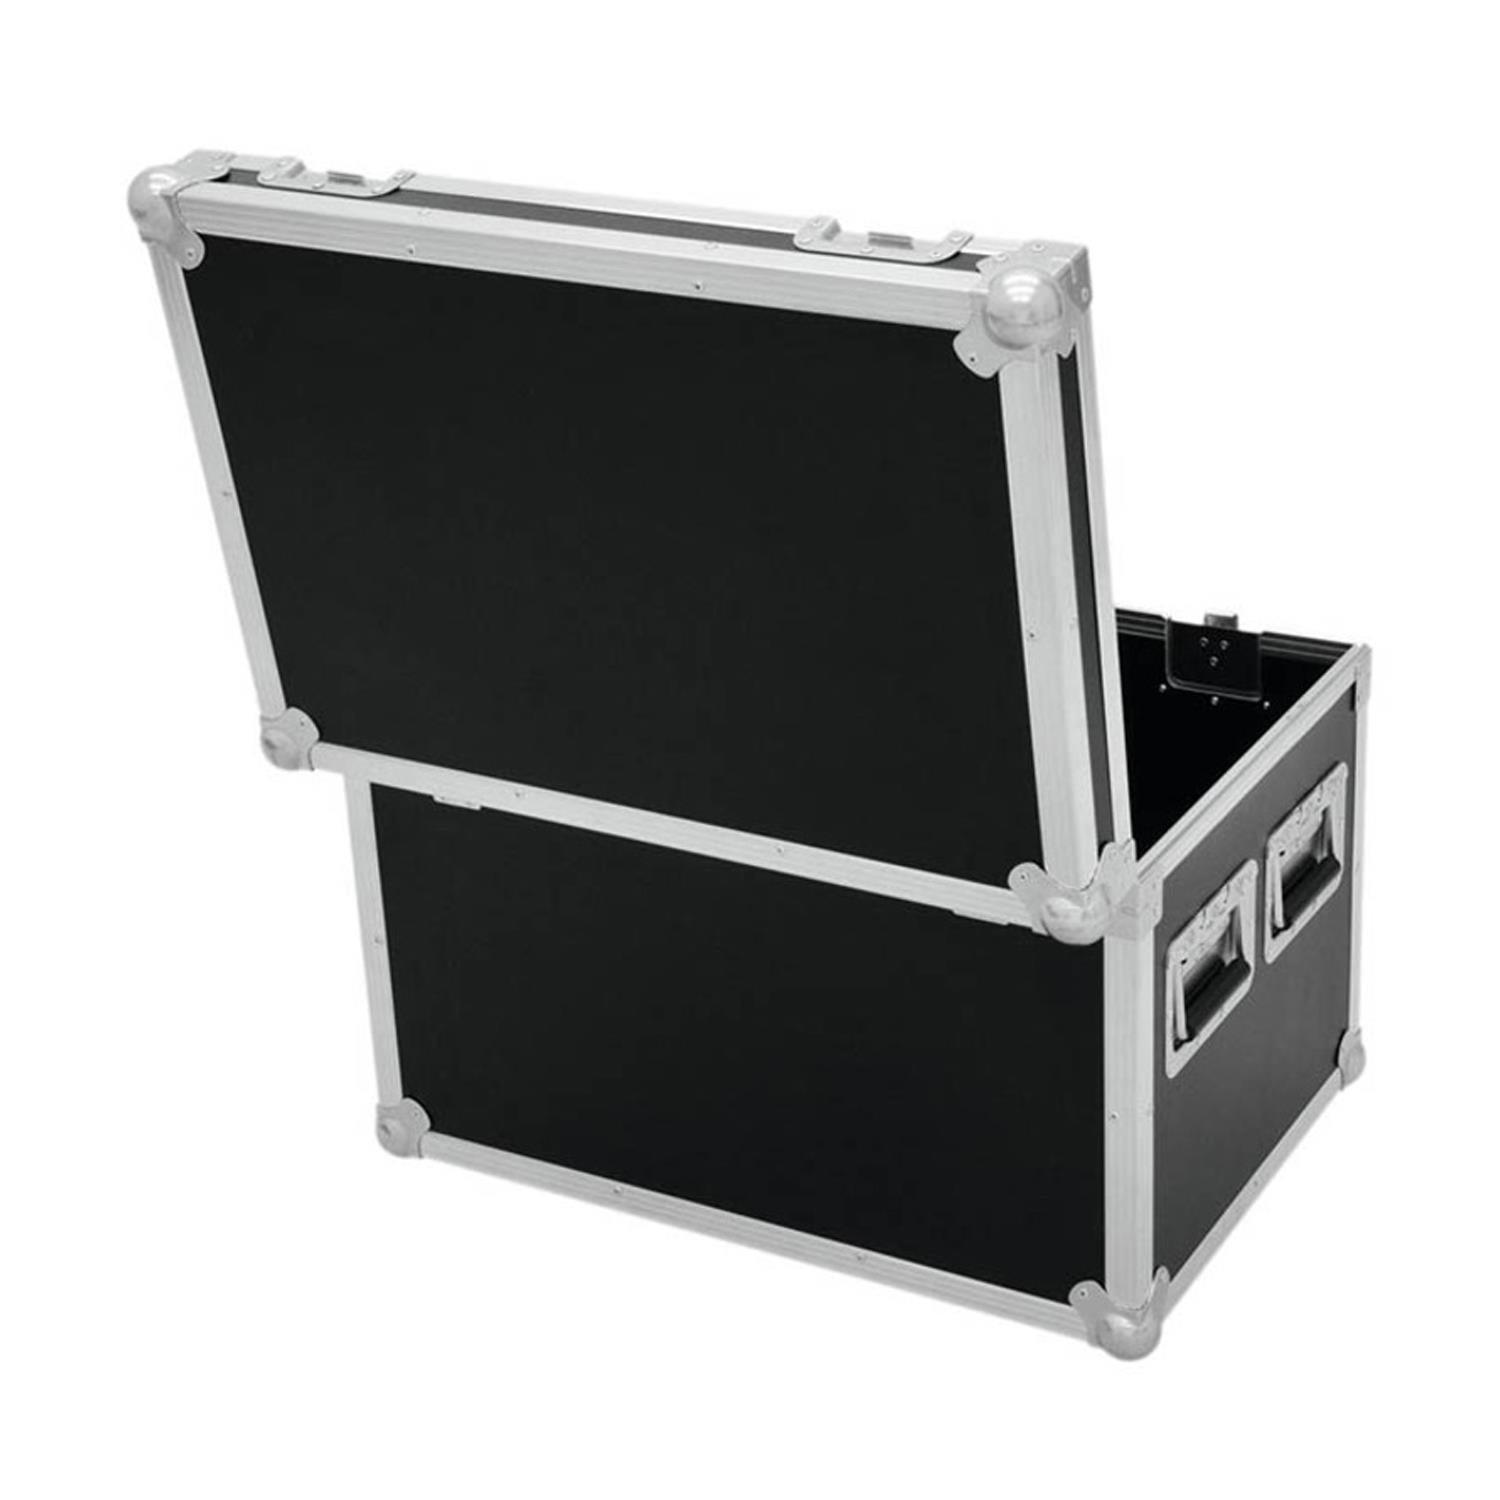 StageCore FC74 Cobra 575 x 415 x 370mm Stacking Case - DY Pro Audio